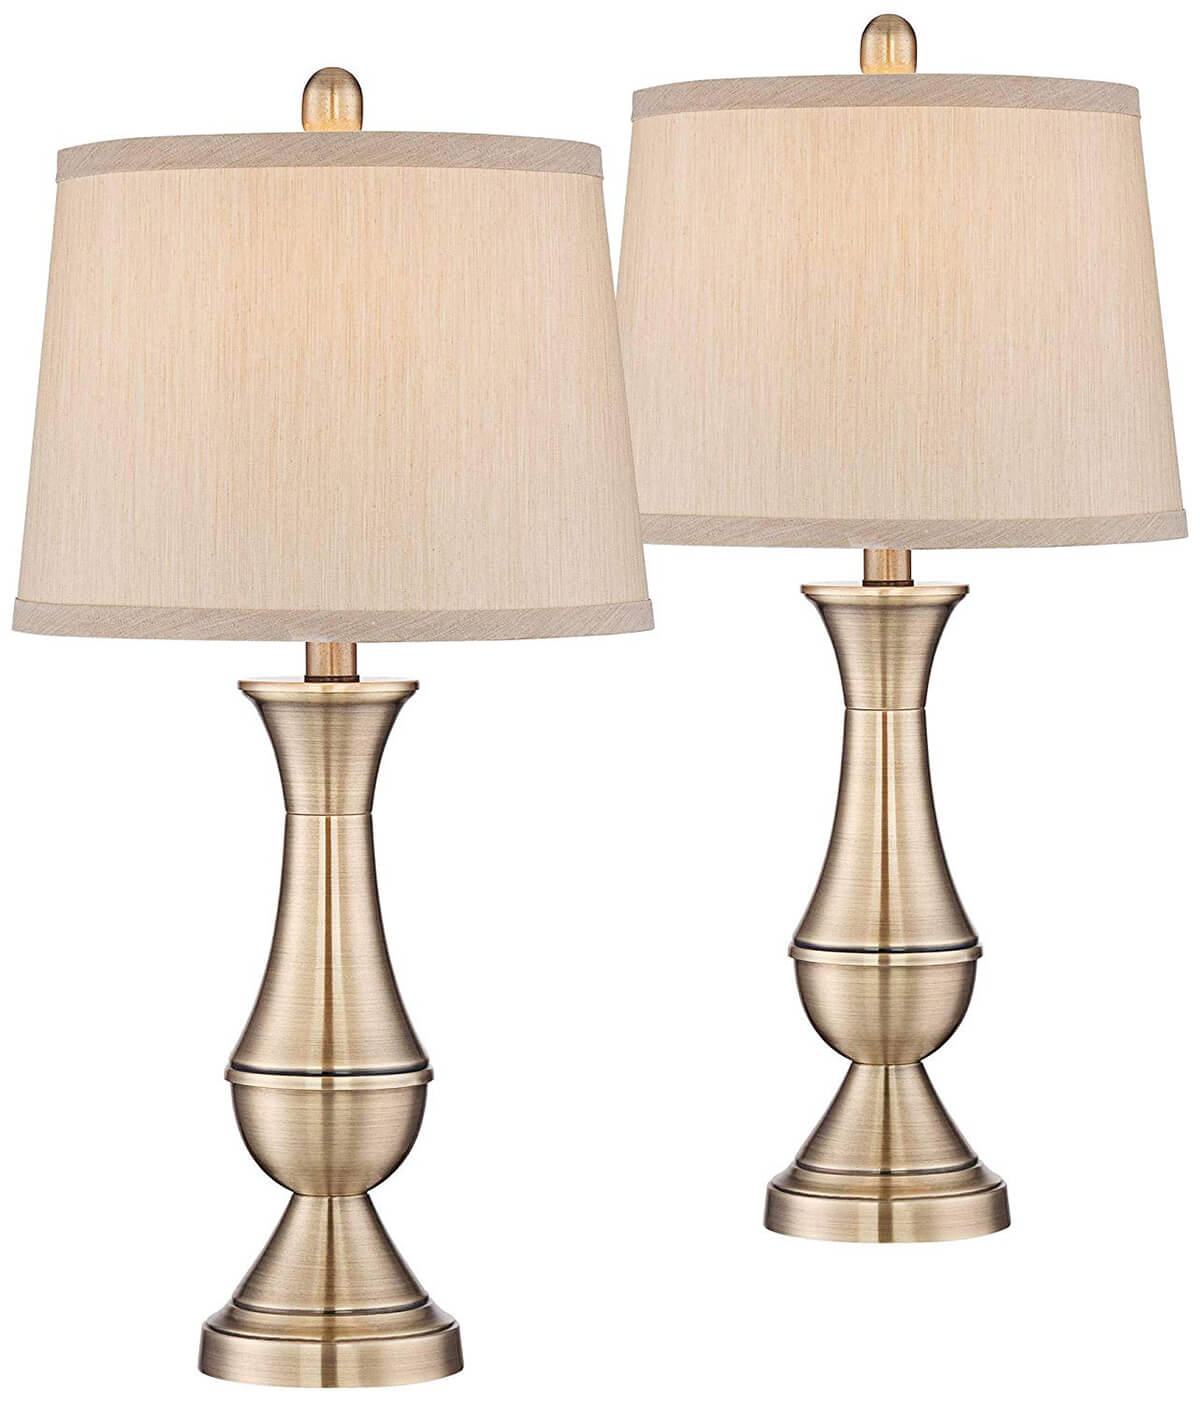 25 Best Bedside Table Lamps To Light Up, Set Of Two Bedside Table Lamps